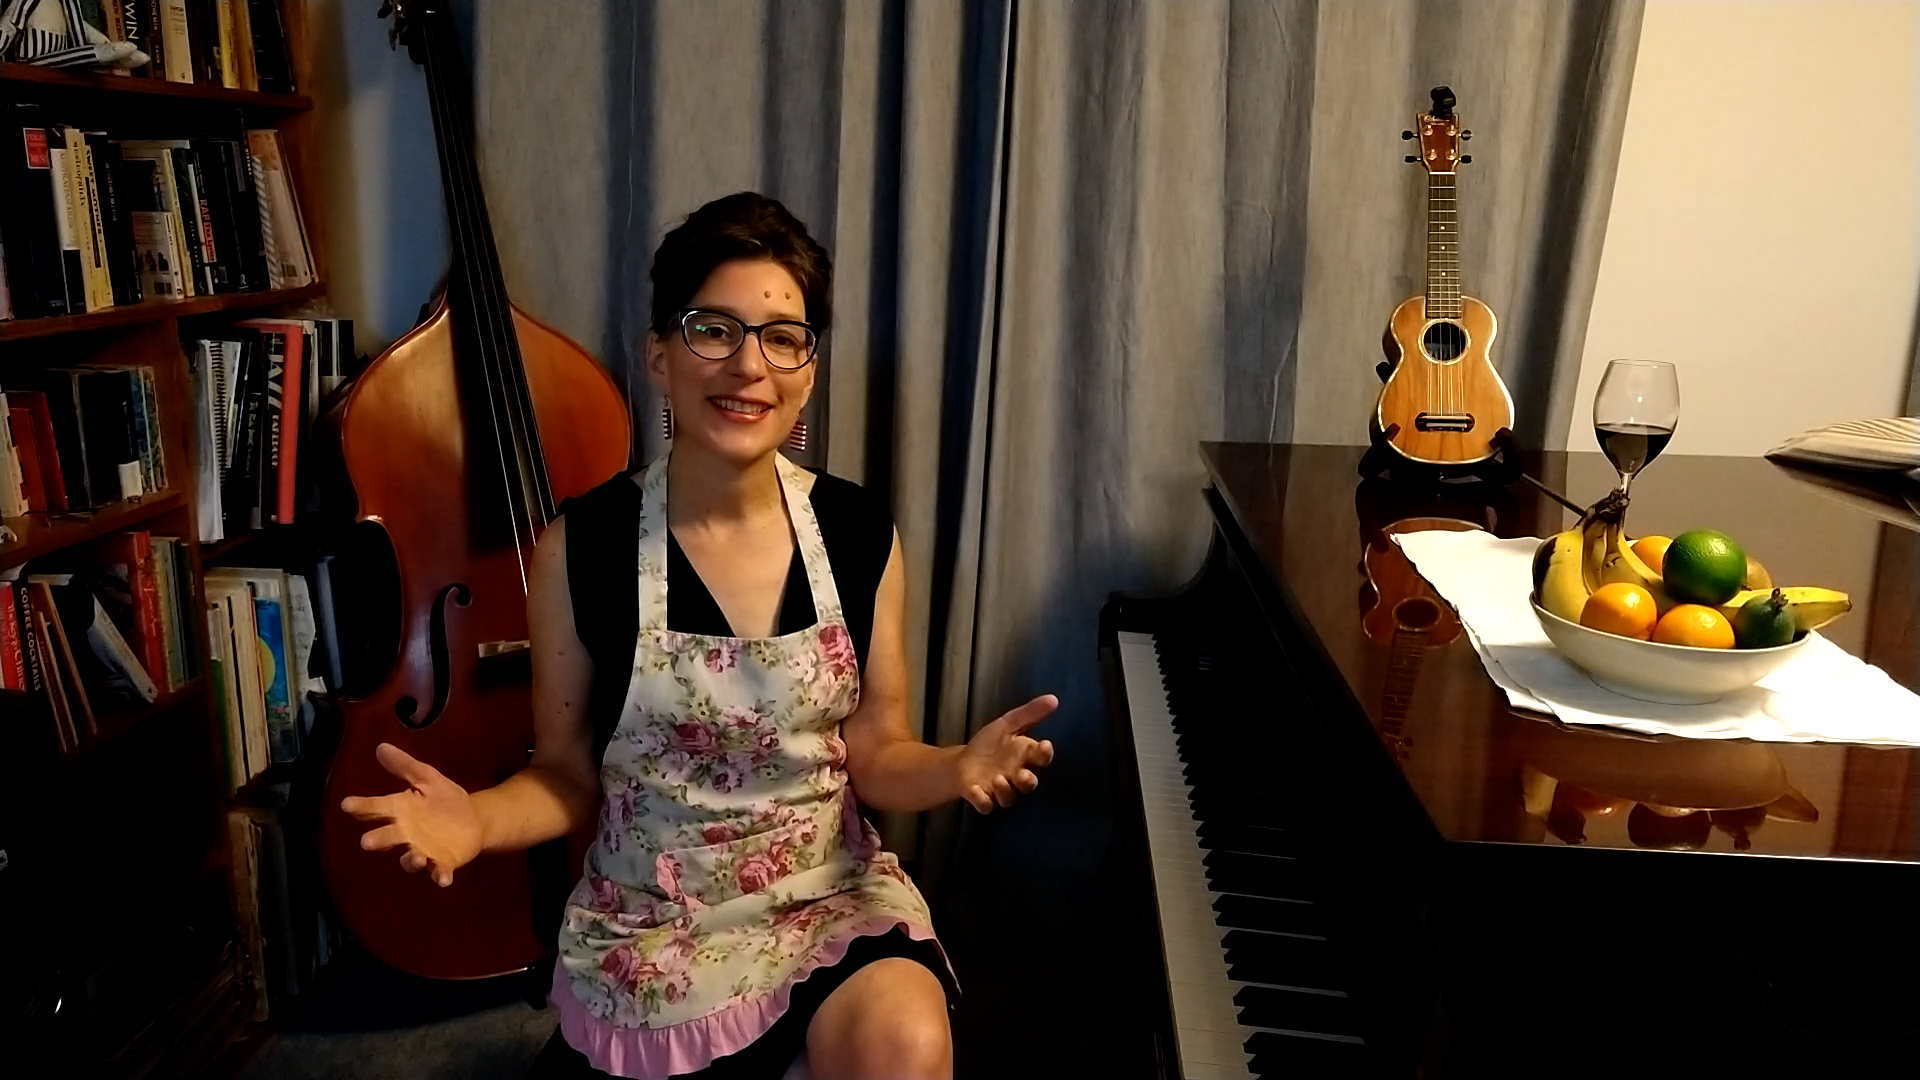 woman wearing apron seated next to a piano and double bass